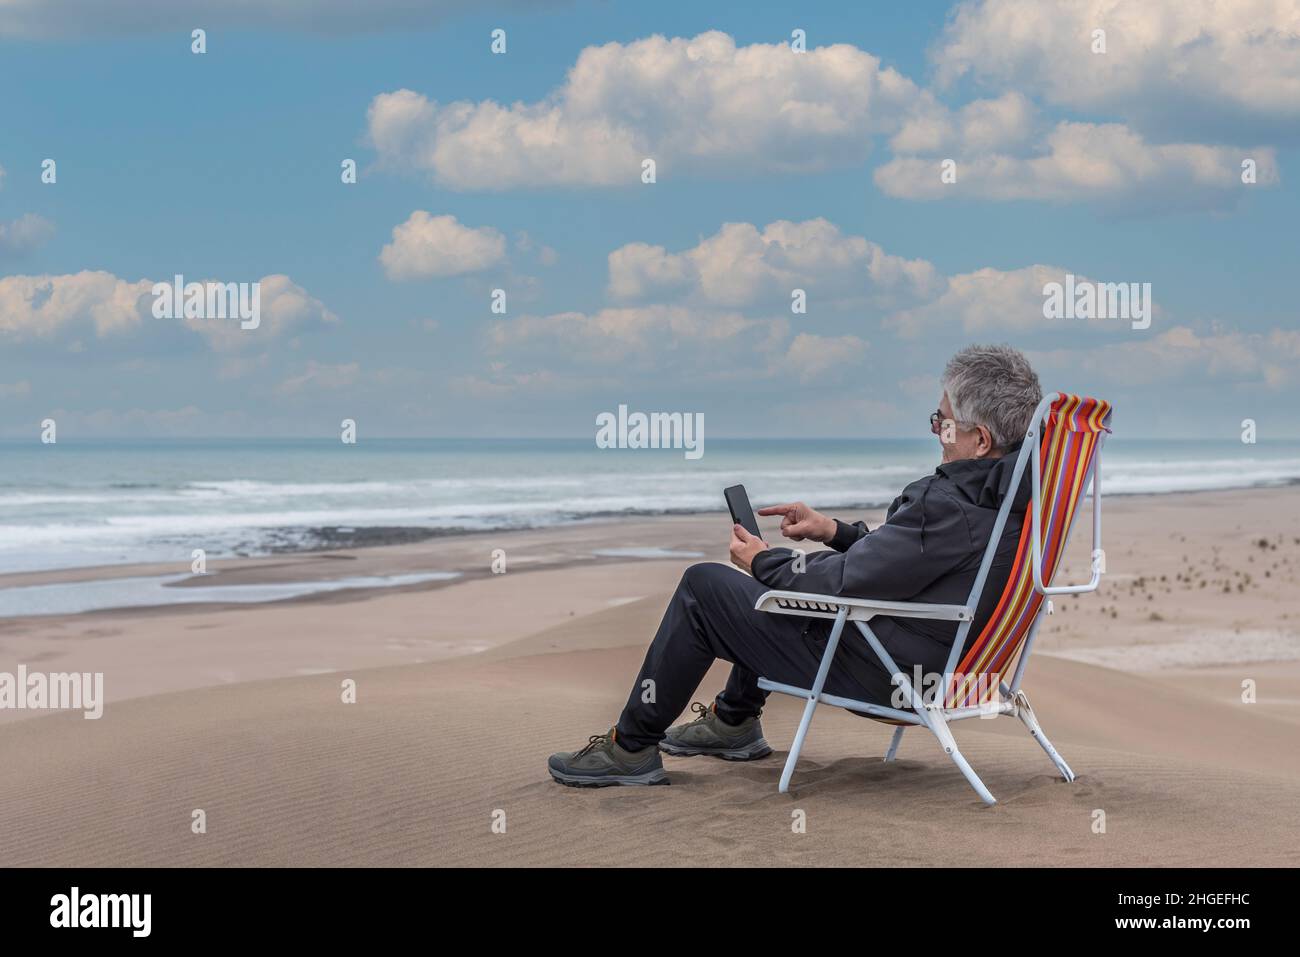 Adult man sitting on a beach chair on top of a beachfront medano typing on smartphone. Horizontal photo Stock Photo